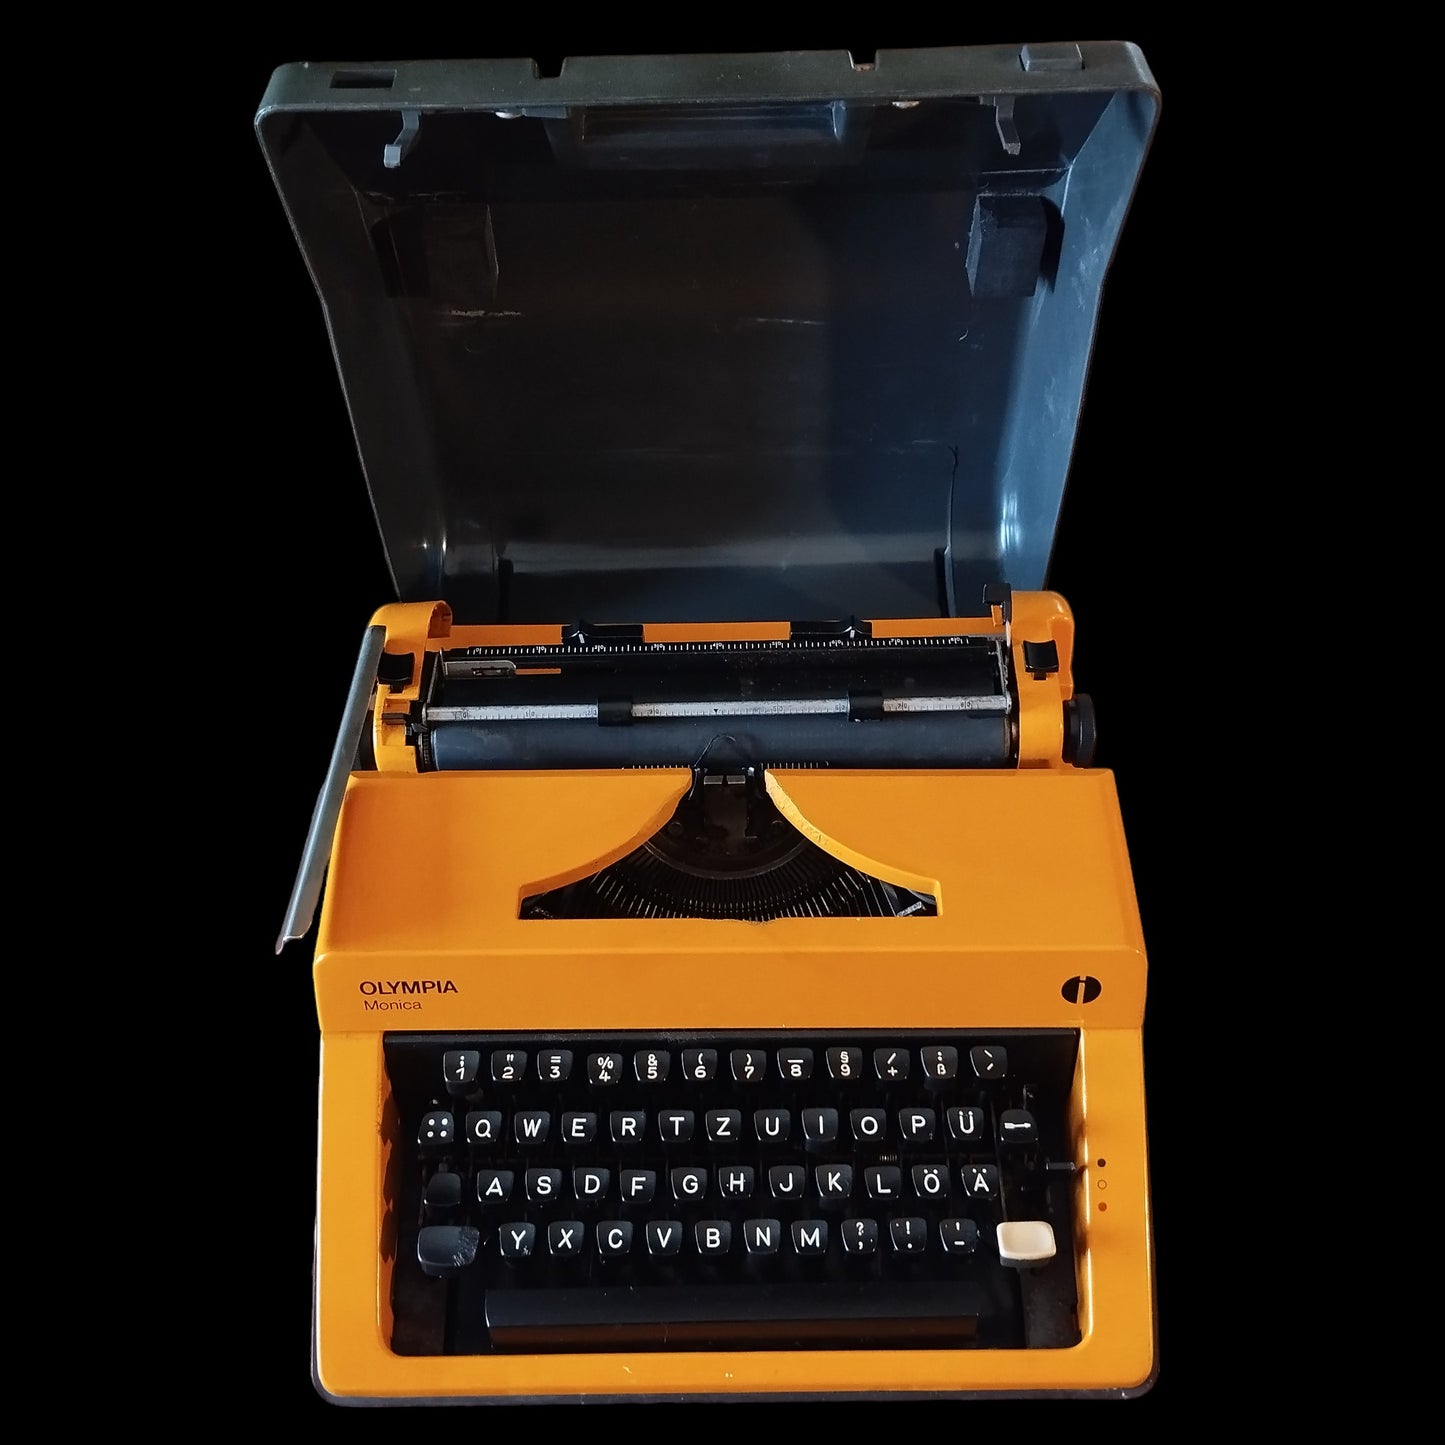 Image of Olympia Monica Typewriter. Available from Universal Typewriter Company.